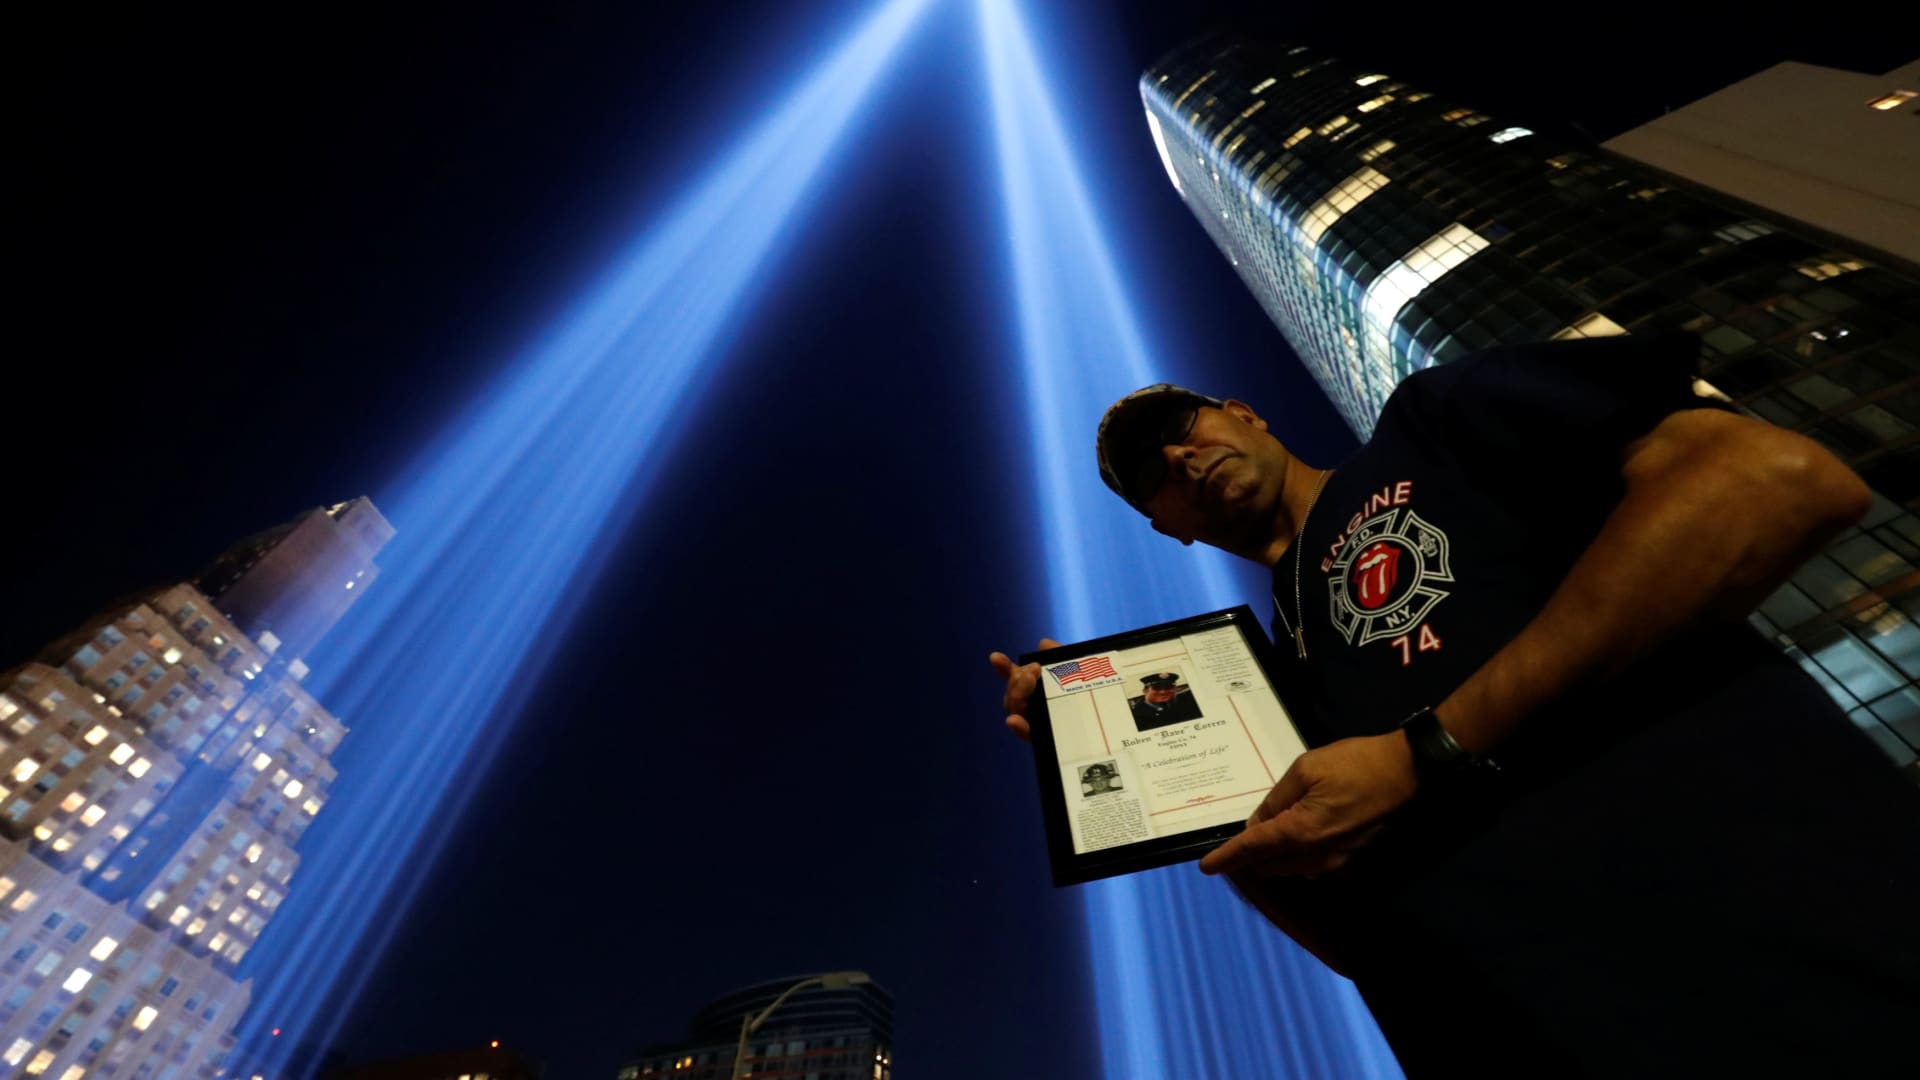 Sergeant Edwin Morales holds a photo of his cousin Rubin Correa from Engine 74 by the Tribute in Light installation ahead of the 20th anniversary of the September 11 attacks in New York City, U.S., September 10, 2021.